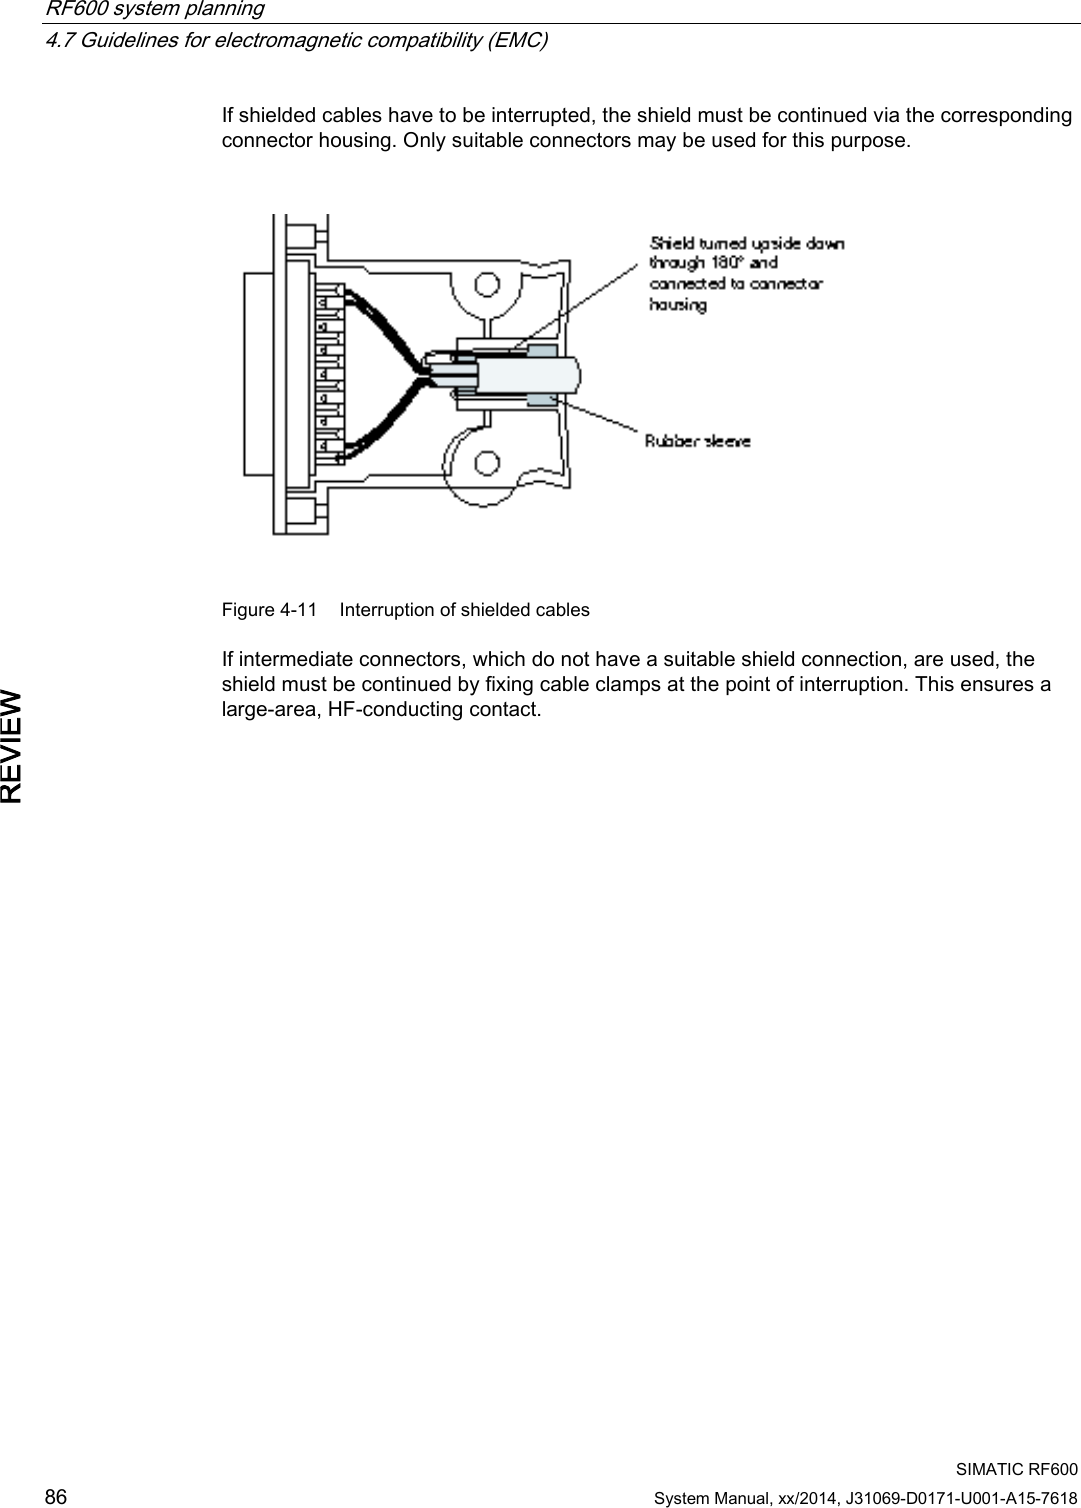 RF600 system planning   4.7 Guidelines for electromagnetic compatibility (EMC)  SIMATIC RF600 86 System Manual, xx/2014, J31069-D0171-U001-A15-7618 REVIEW If shielded cables have to be interrupted, the shield must be continued via the corresponding connector housing. Only suitable connectors may be used for this purpose.   Figure 4-11 Interruption of shielded cables If intermediate connectors, which do not have a suitable shield connection, are used, the shield must be continued by fixing cable clamps at the point of interruption. This ensures a large-area, HF-conducting contact. 